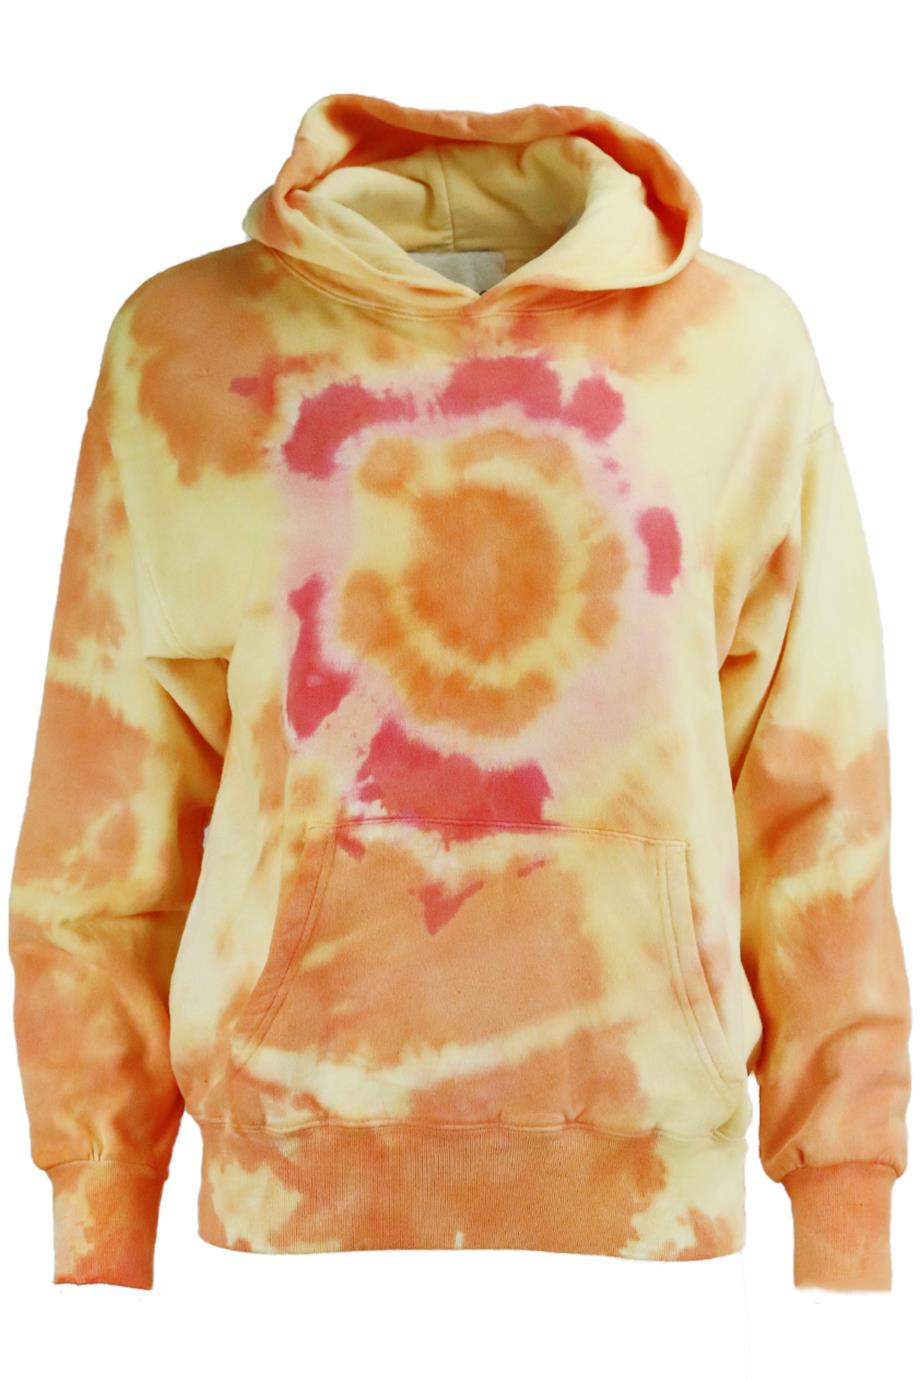 DANNIJO TIE DYED COTTON JERSEY HOODIE SMALL